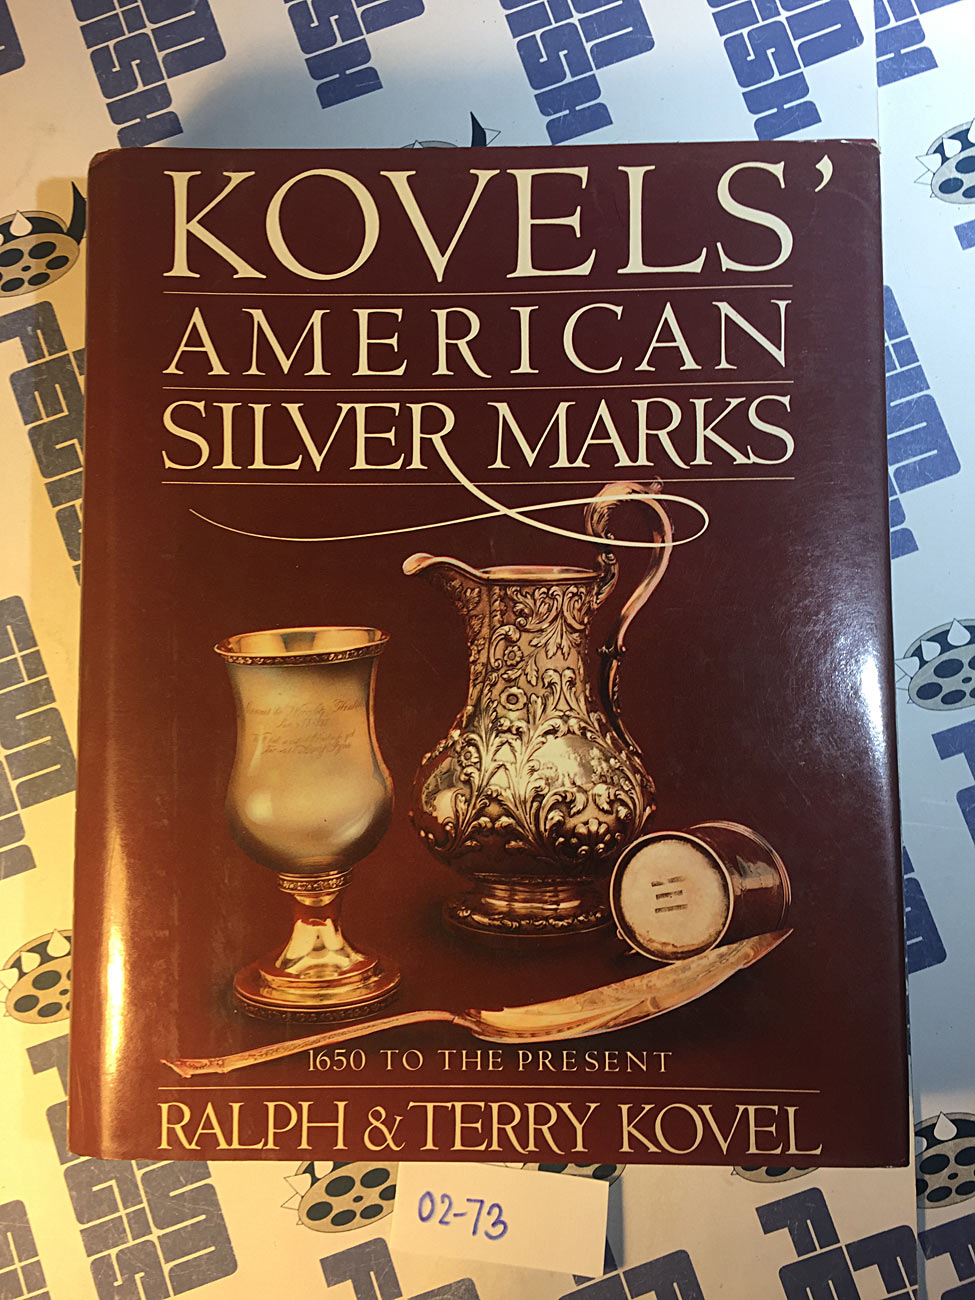 Kovels’ American Silver Marks: 1605 to the Present Hardcover, Ralph and Terry Kovel [273]